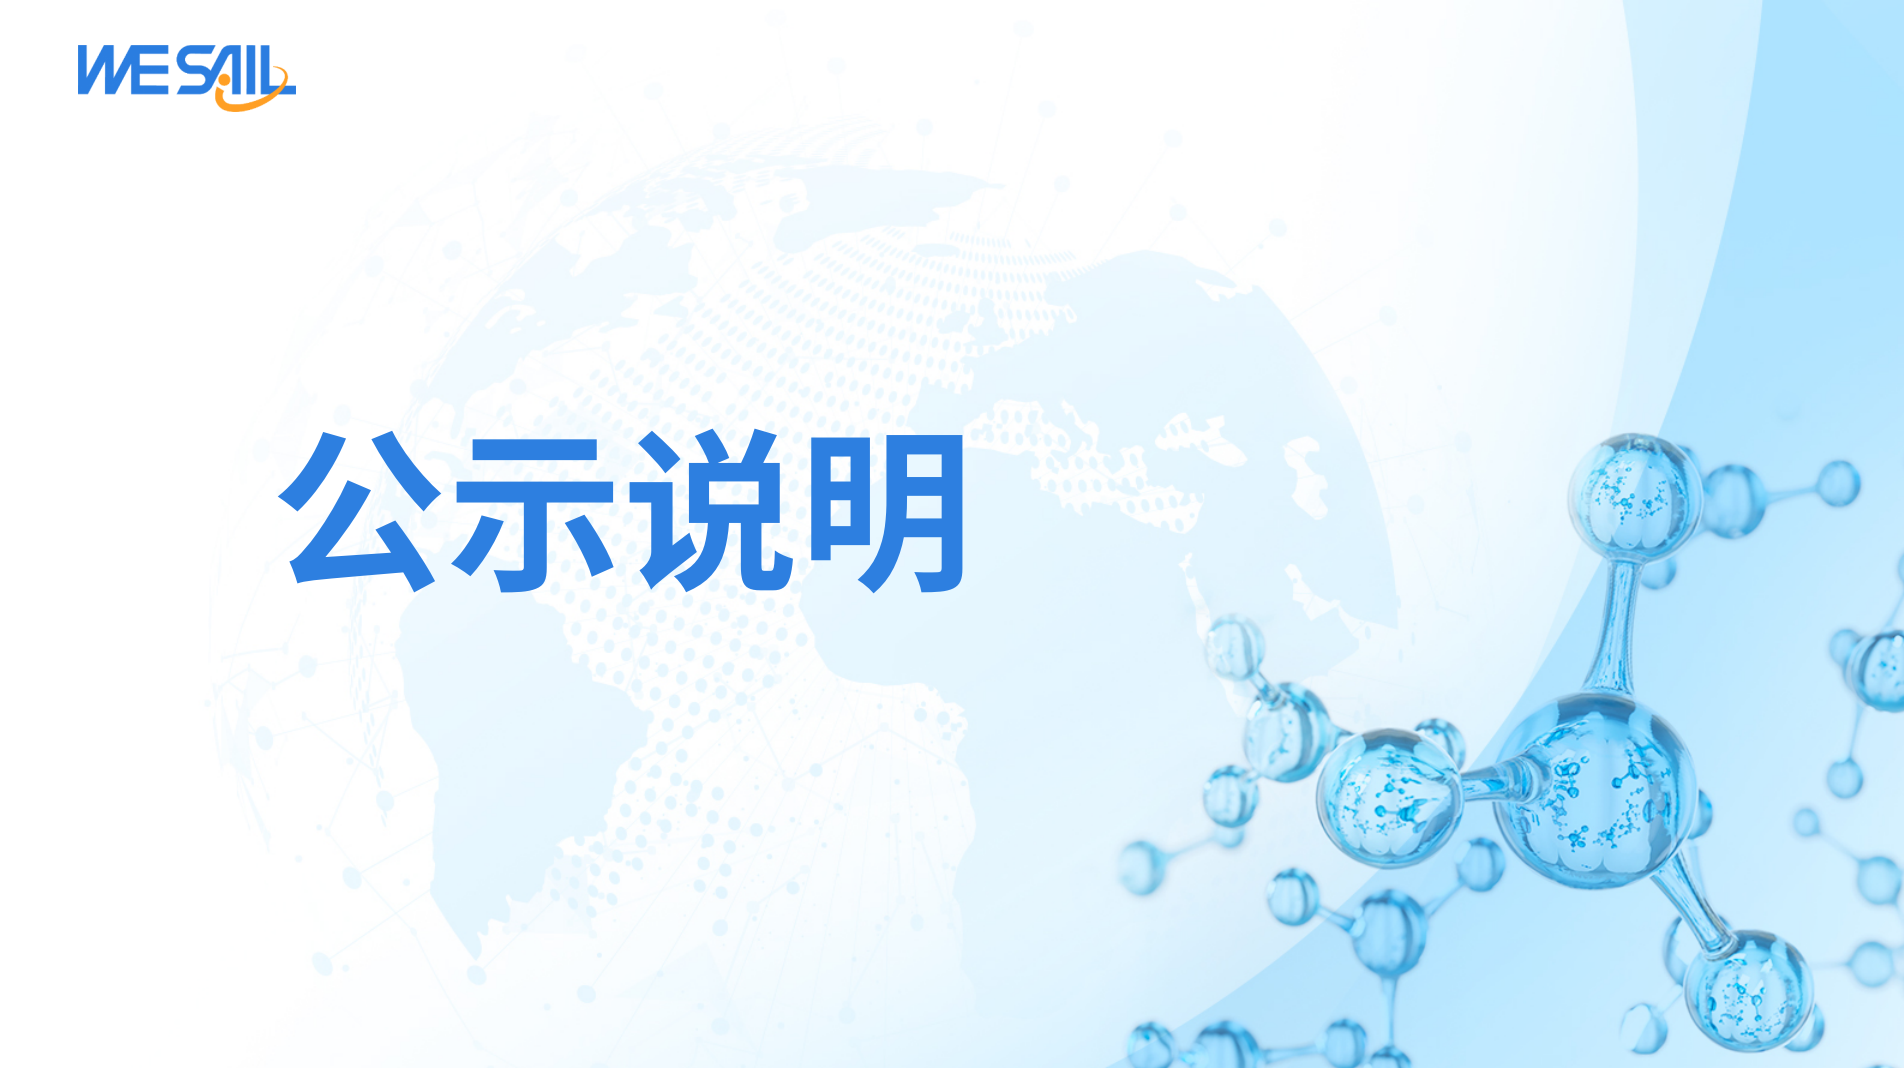 On December 27, 2019, Guangdong Weishi Biotechnology Co., Ltd. was officially established.